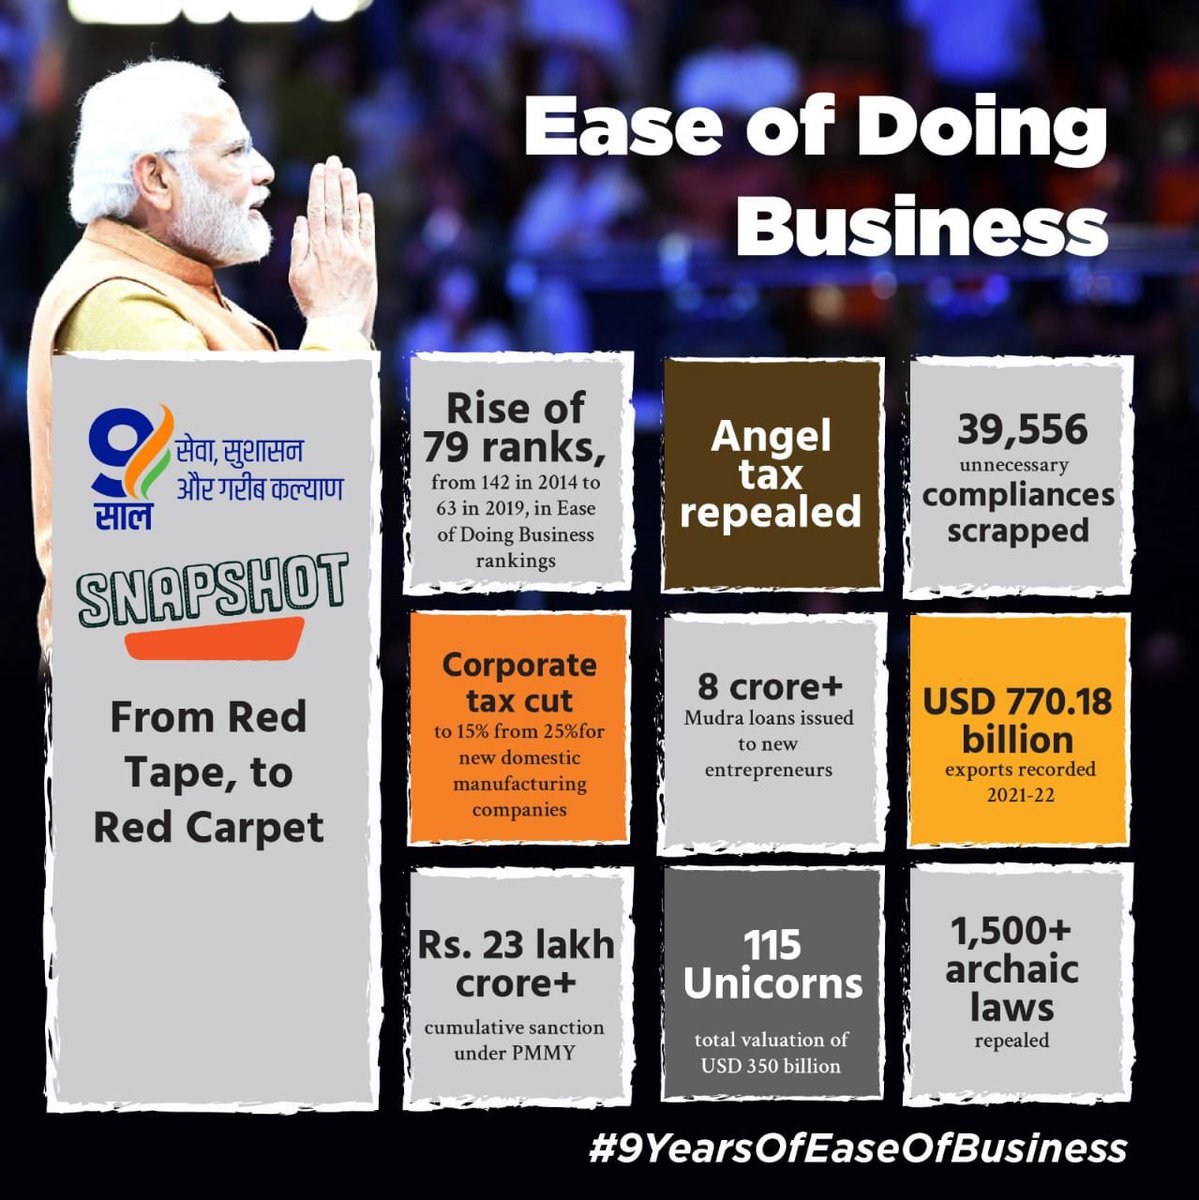 The #9YearsOfEaseOfBusiness have made the economy of India scale newer and newer heights!